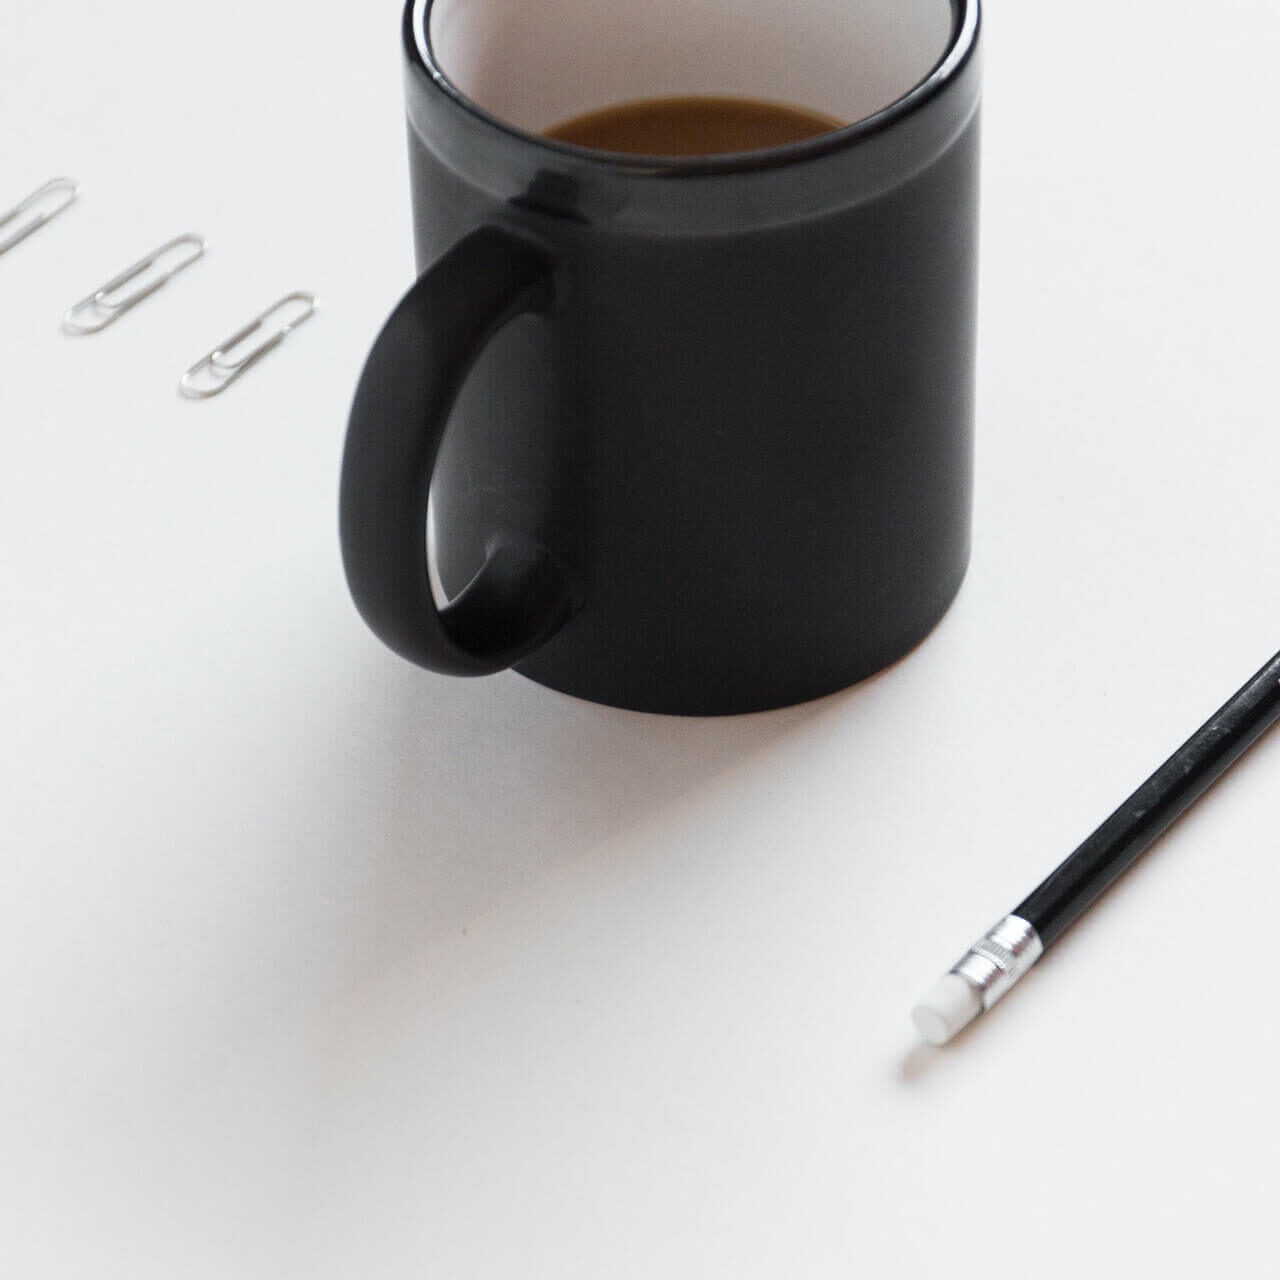 paperclips, coffee mug, pencil, and eraser set up in a line